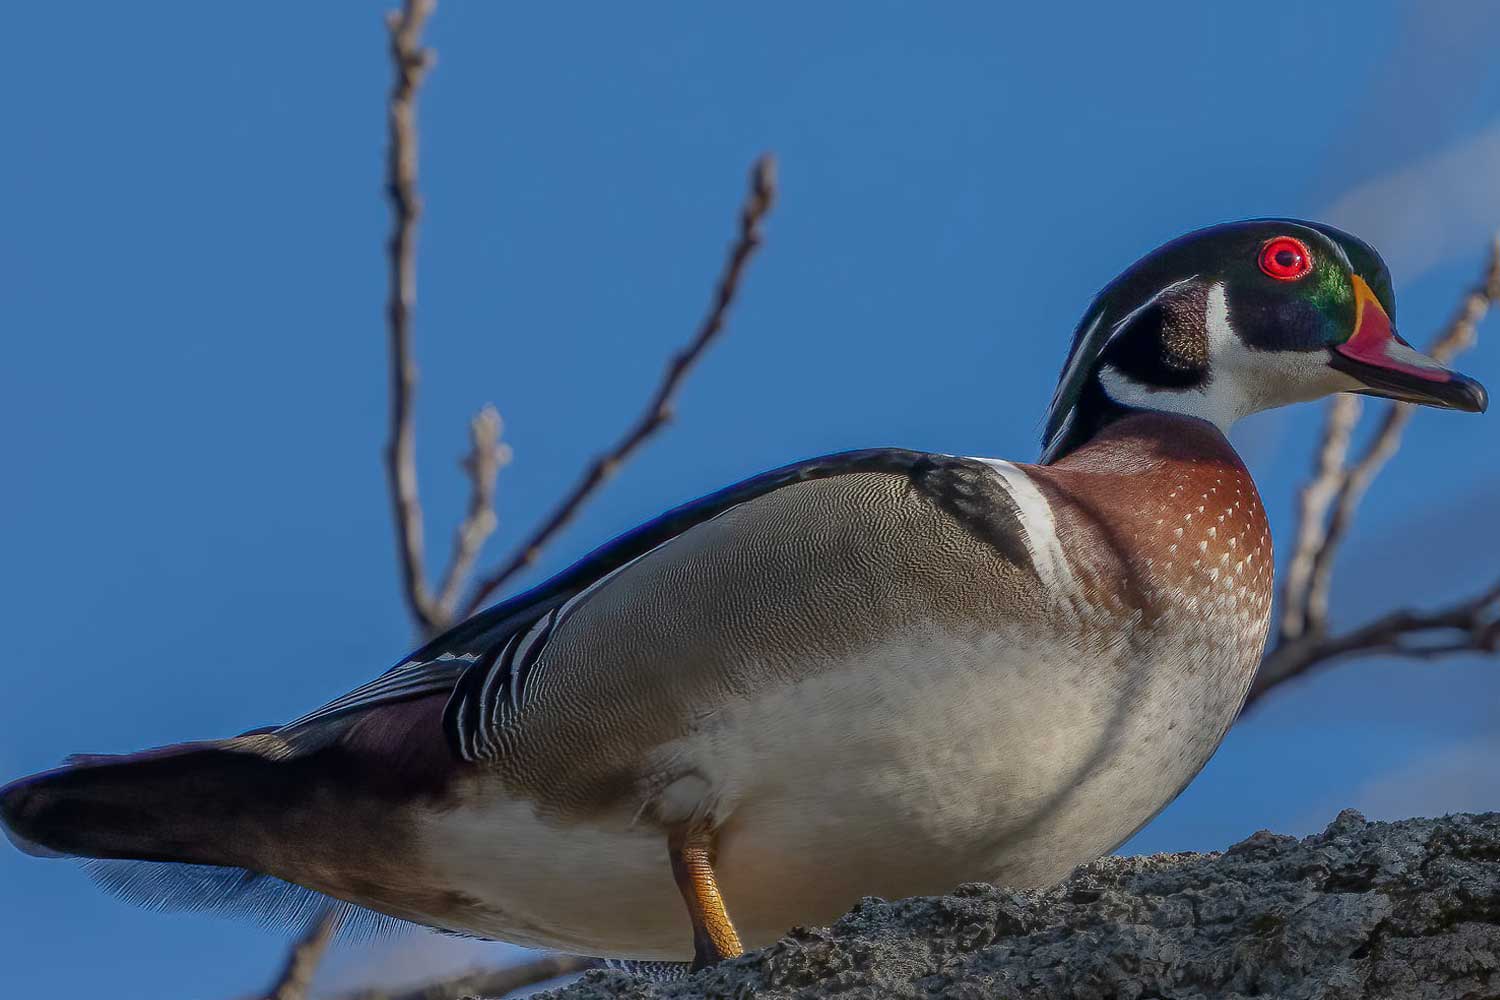 Wood duck standing on a branch in a tree.